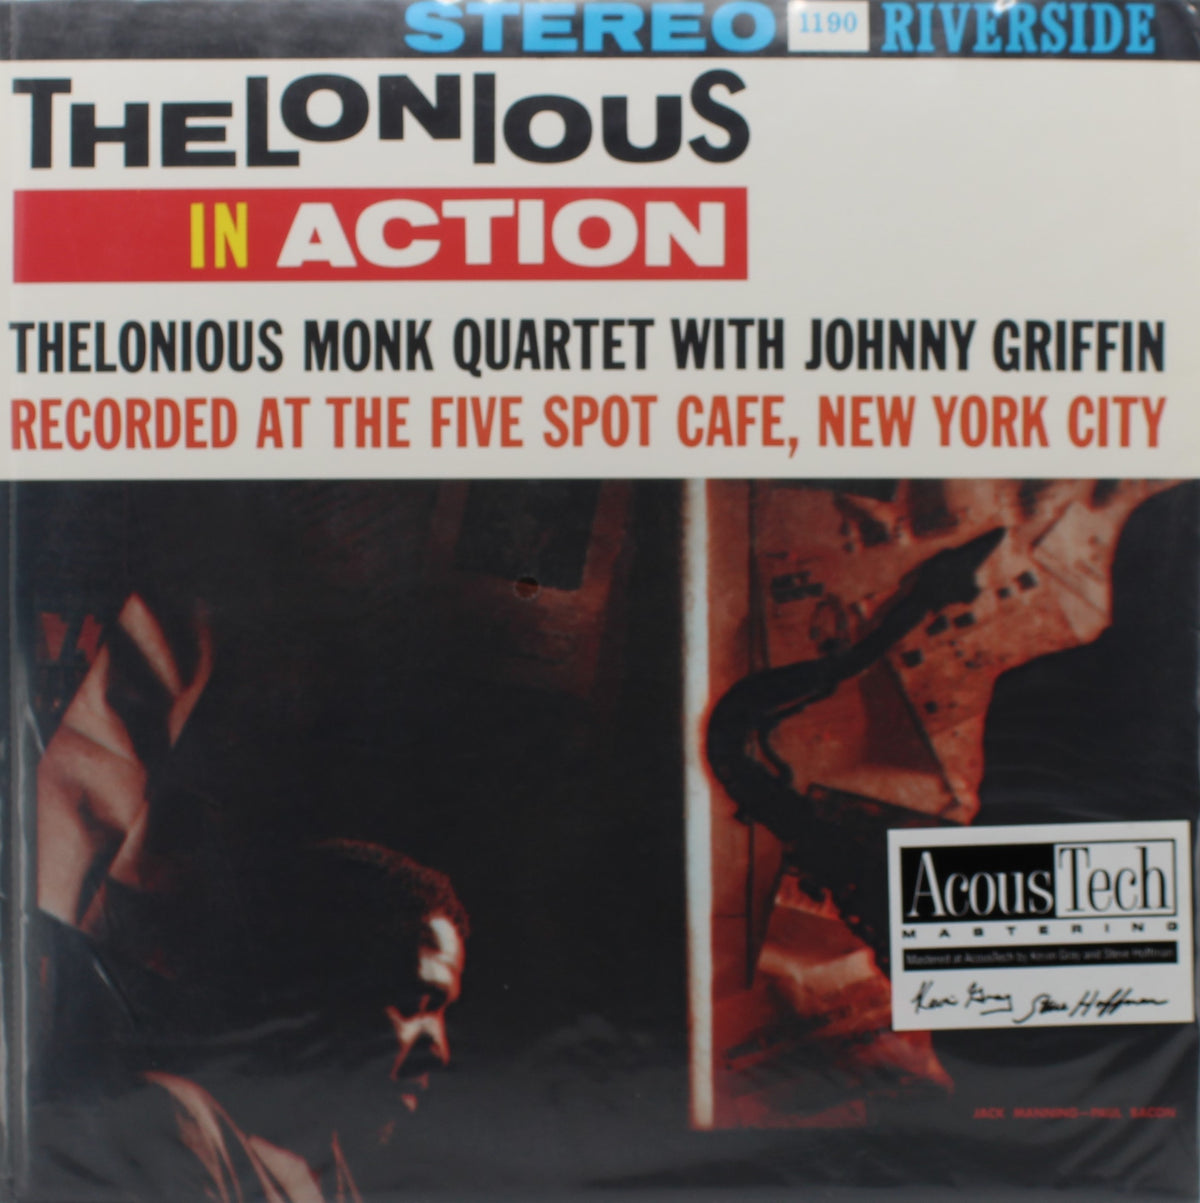 Thelonious Monk Quartet With Johnny Griffin ‎– Thelonious In Action, 2 × Vinyl, LP, 45 RPM, Reissue, Remastered, 180 Gram, Jazz, USA 2004